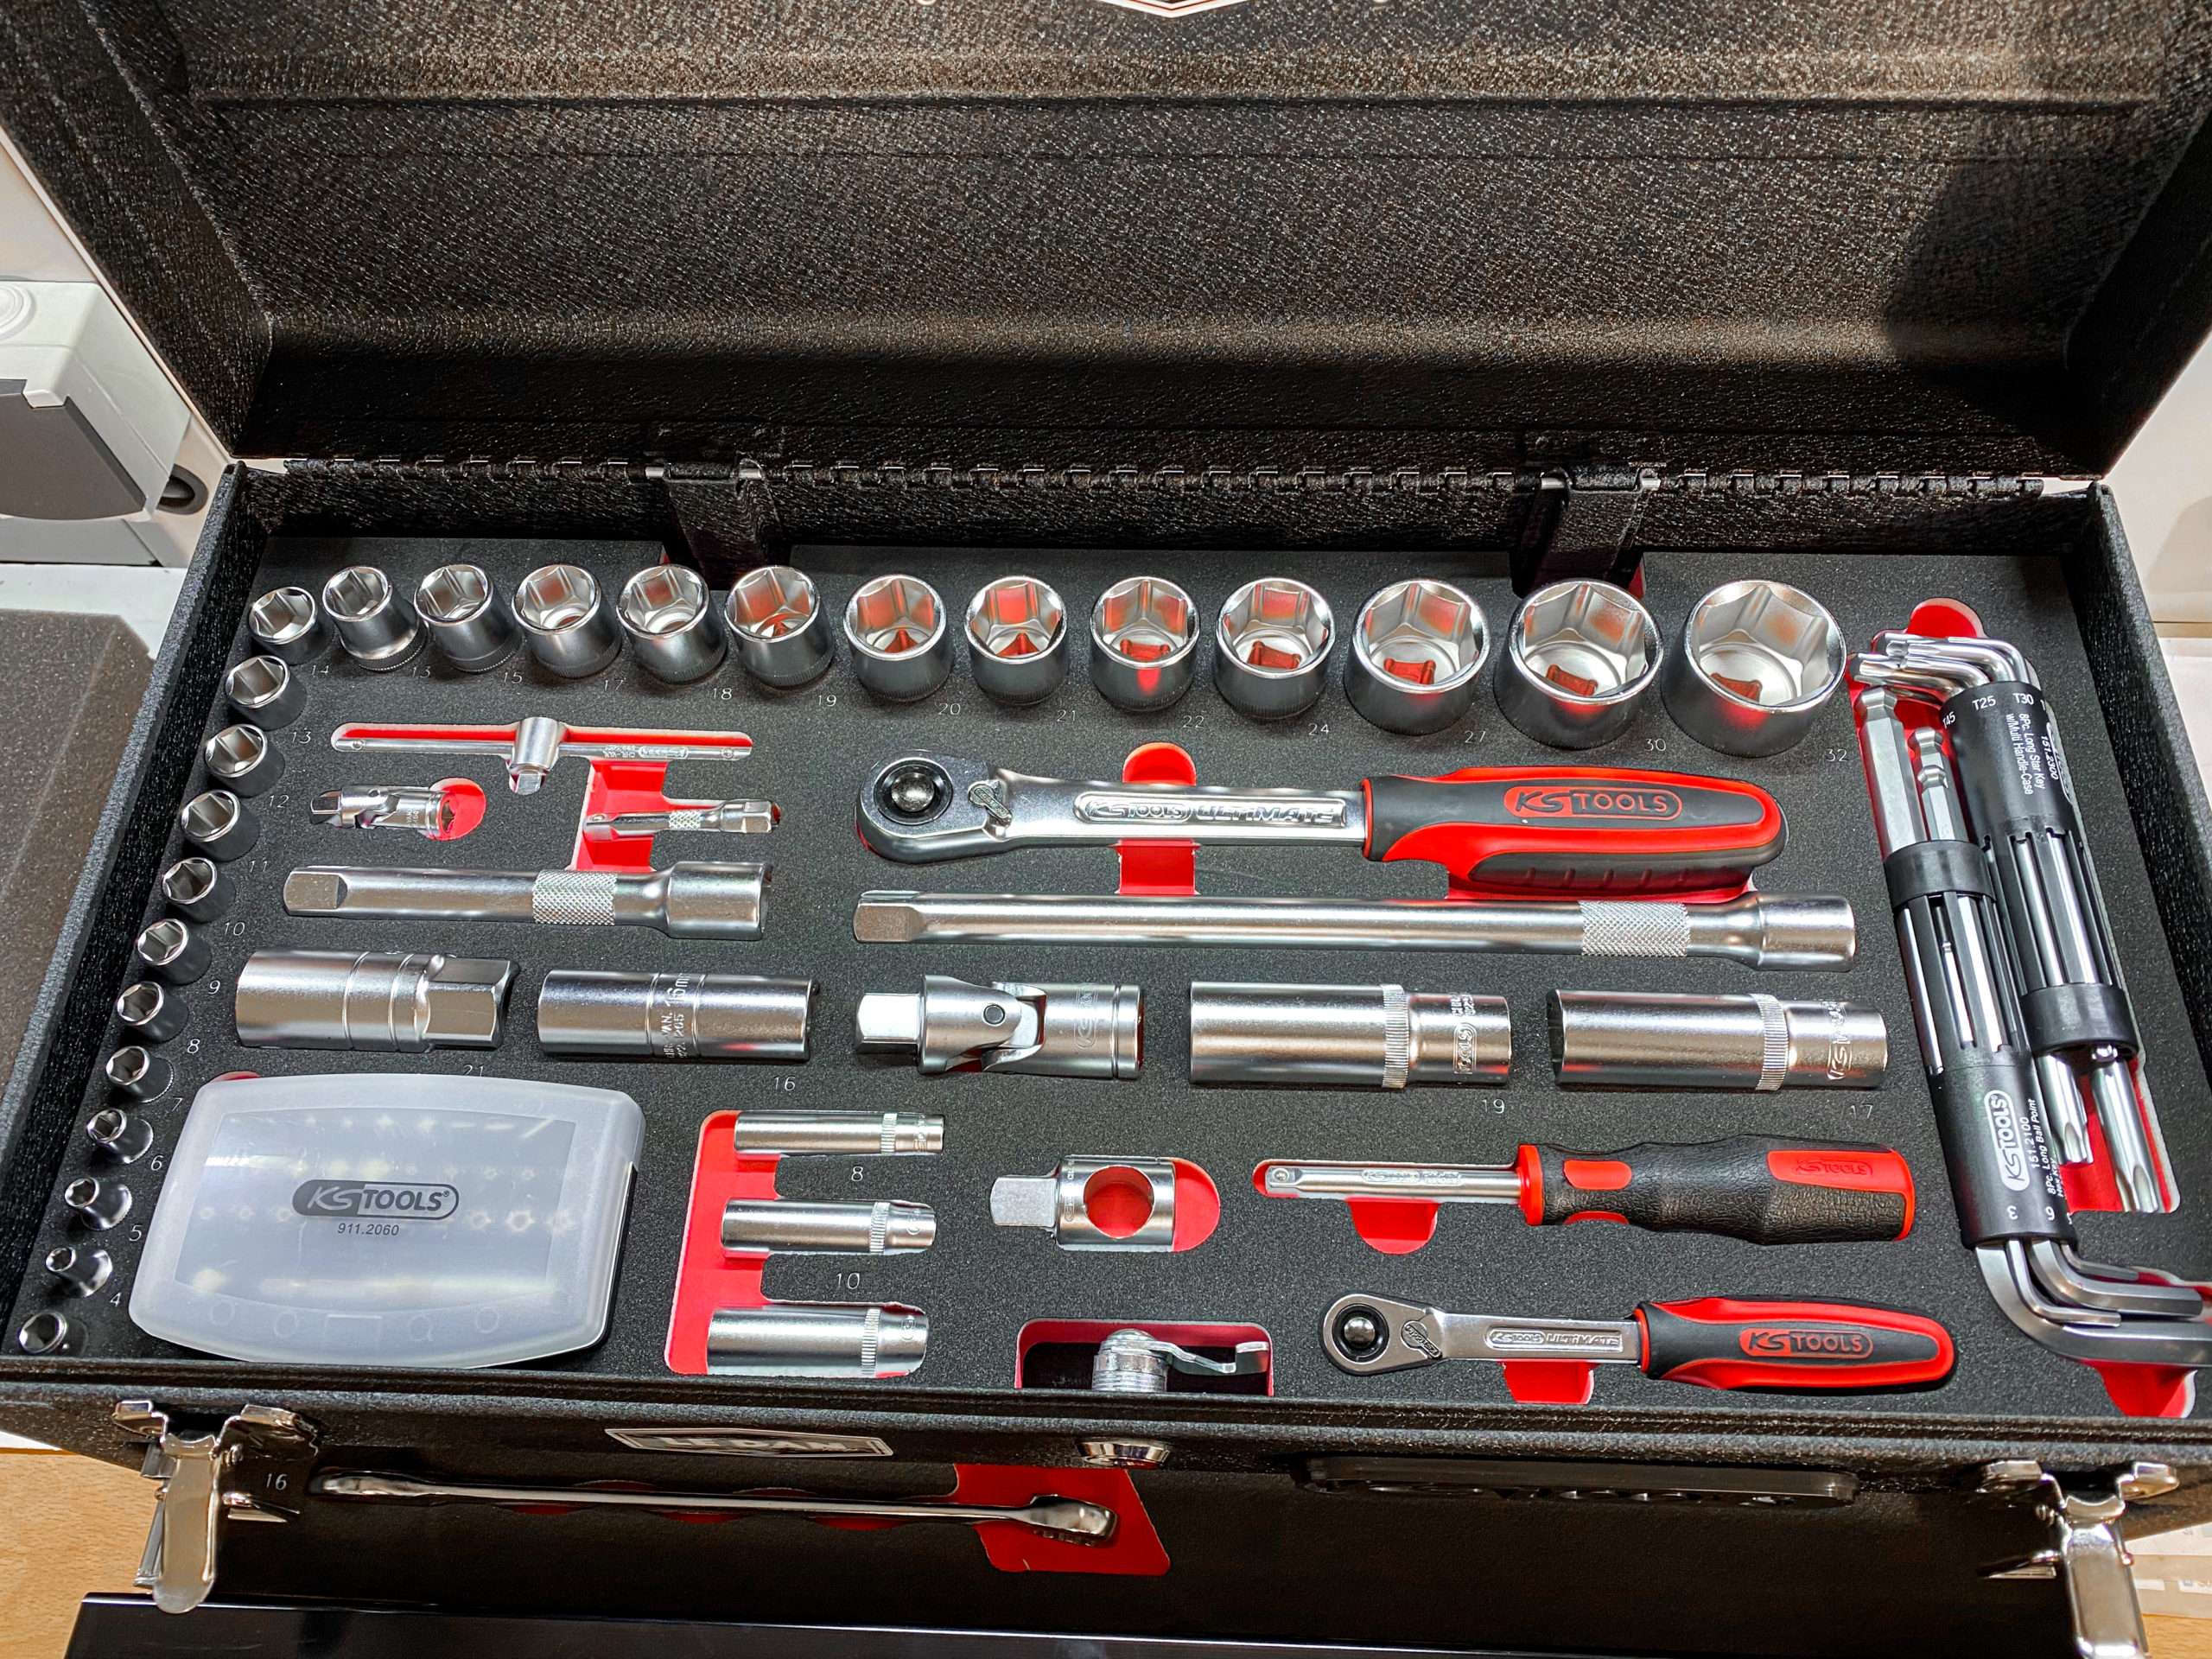 Caisse a outils OUTSIDERS by KS Tools